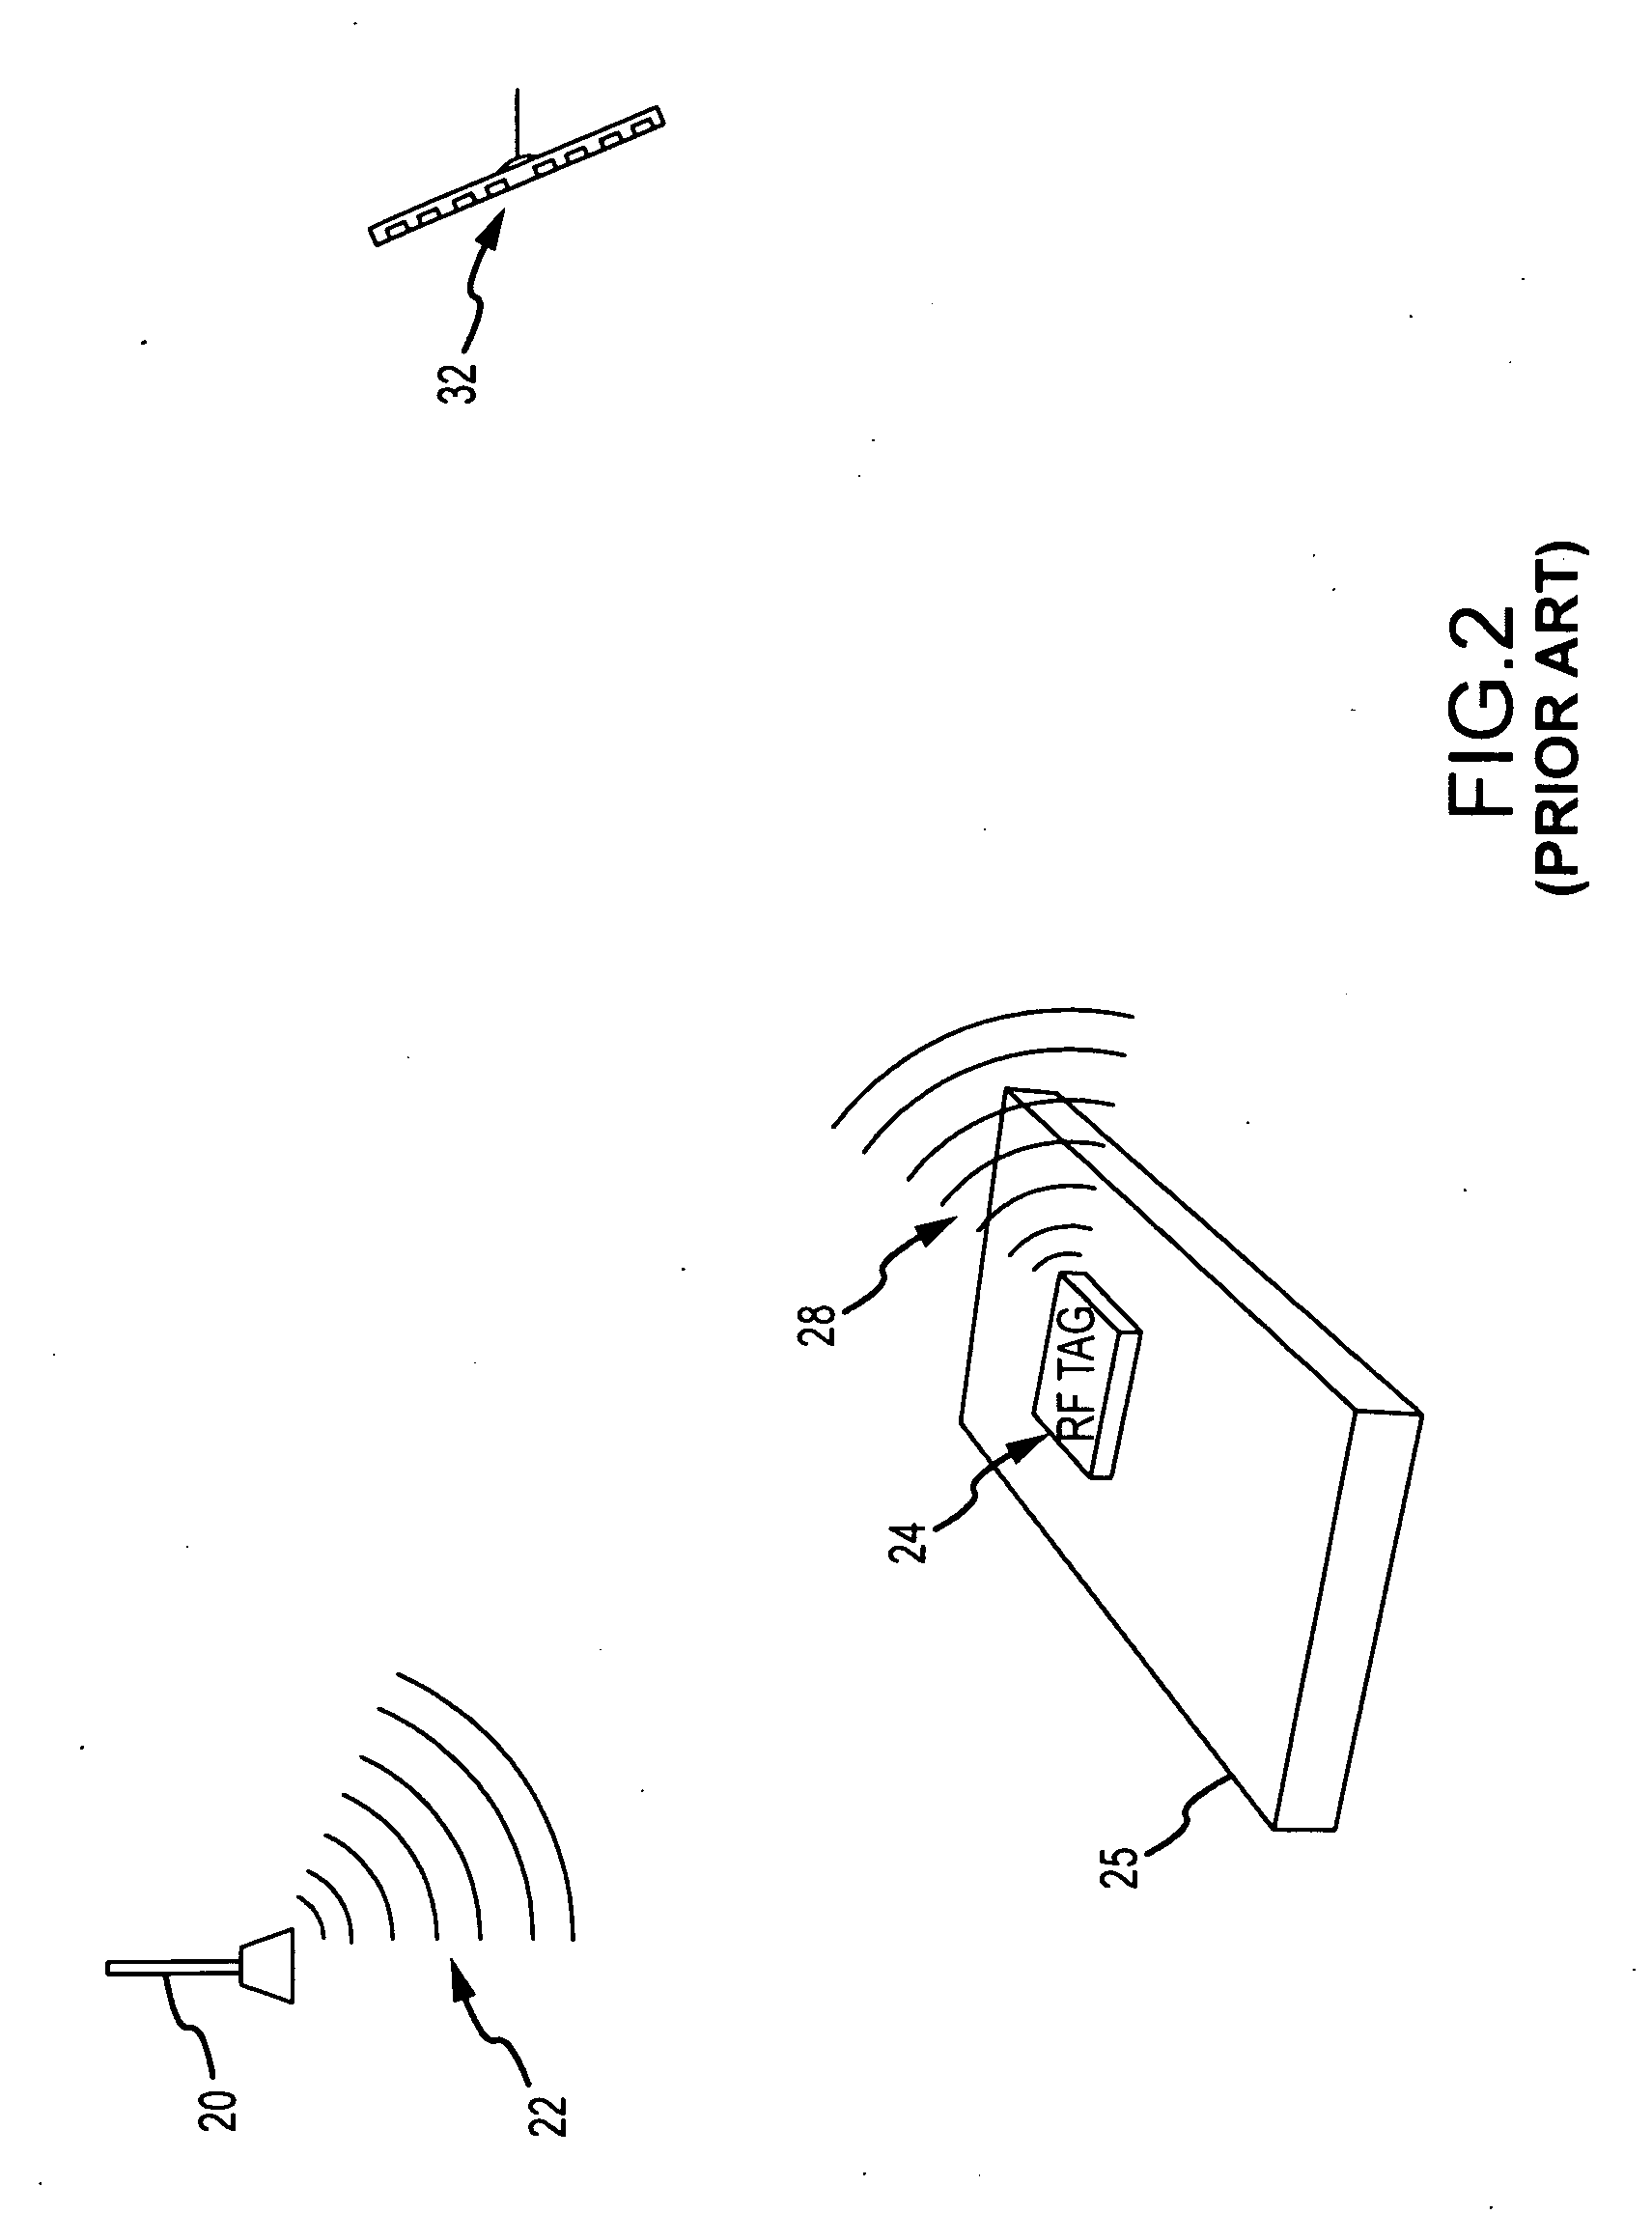 System and method of orbital angular momentum (OAM) diverse signal processing using classical beams